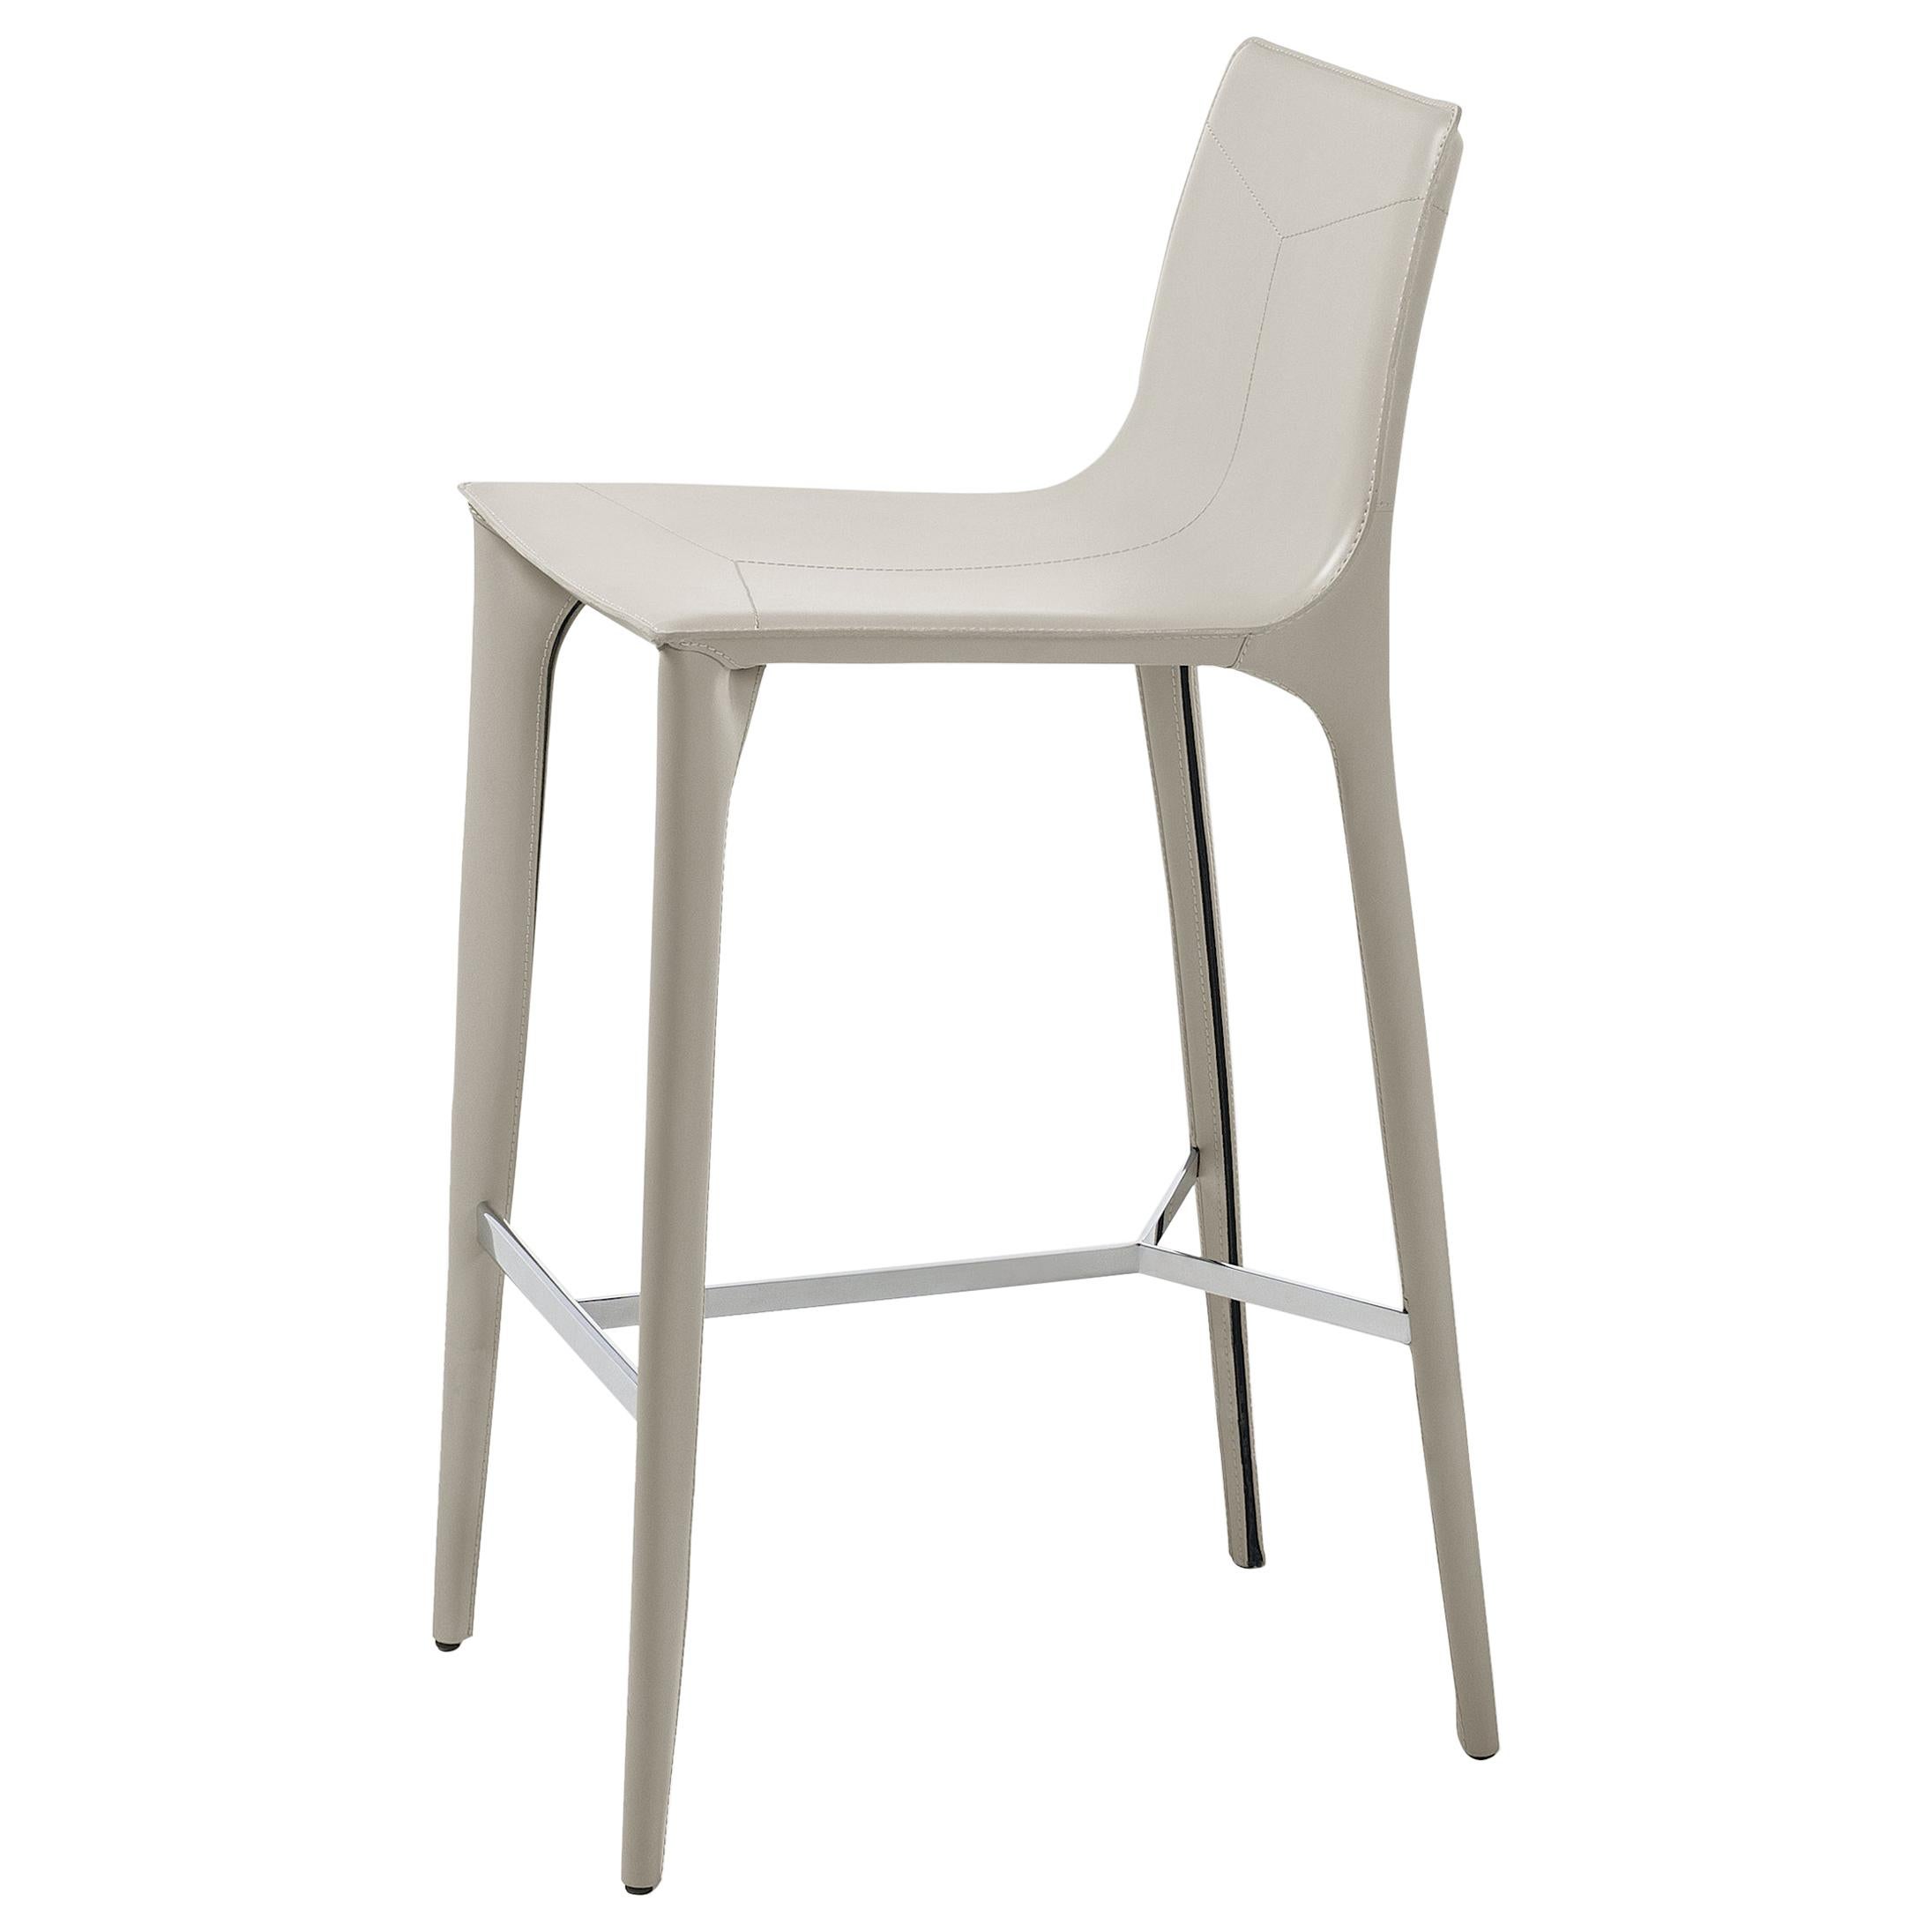 HOLLY HUNT Adriatic Bar Stool in Polished Chrome with Ice Grey Leather Finish